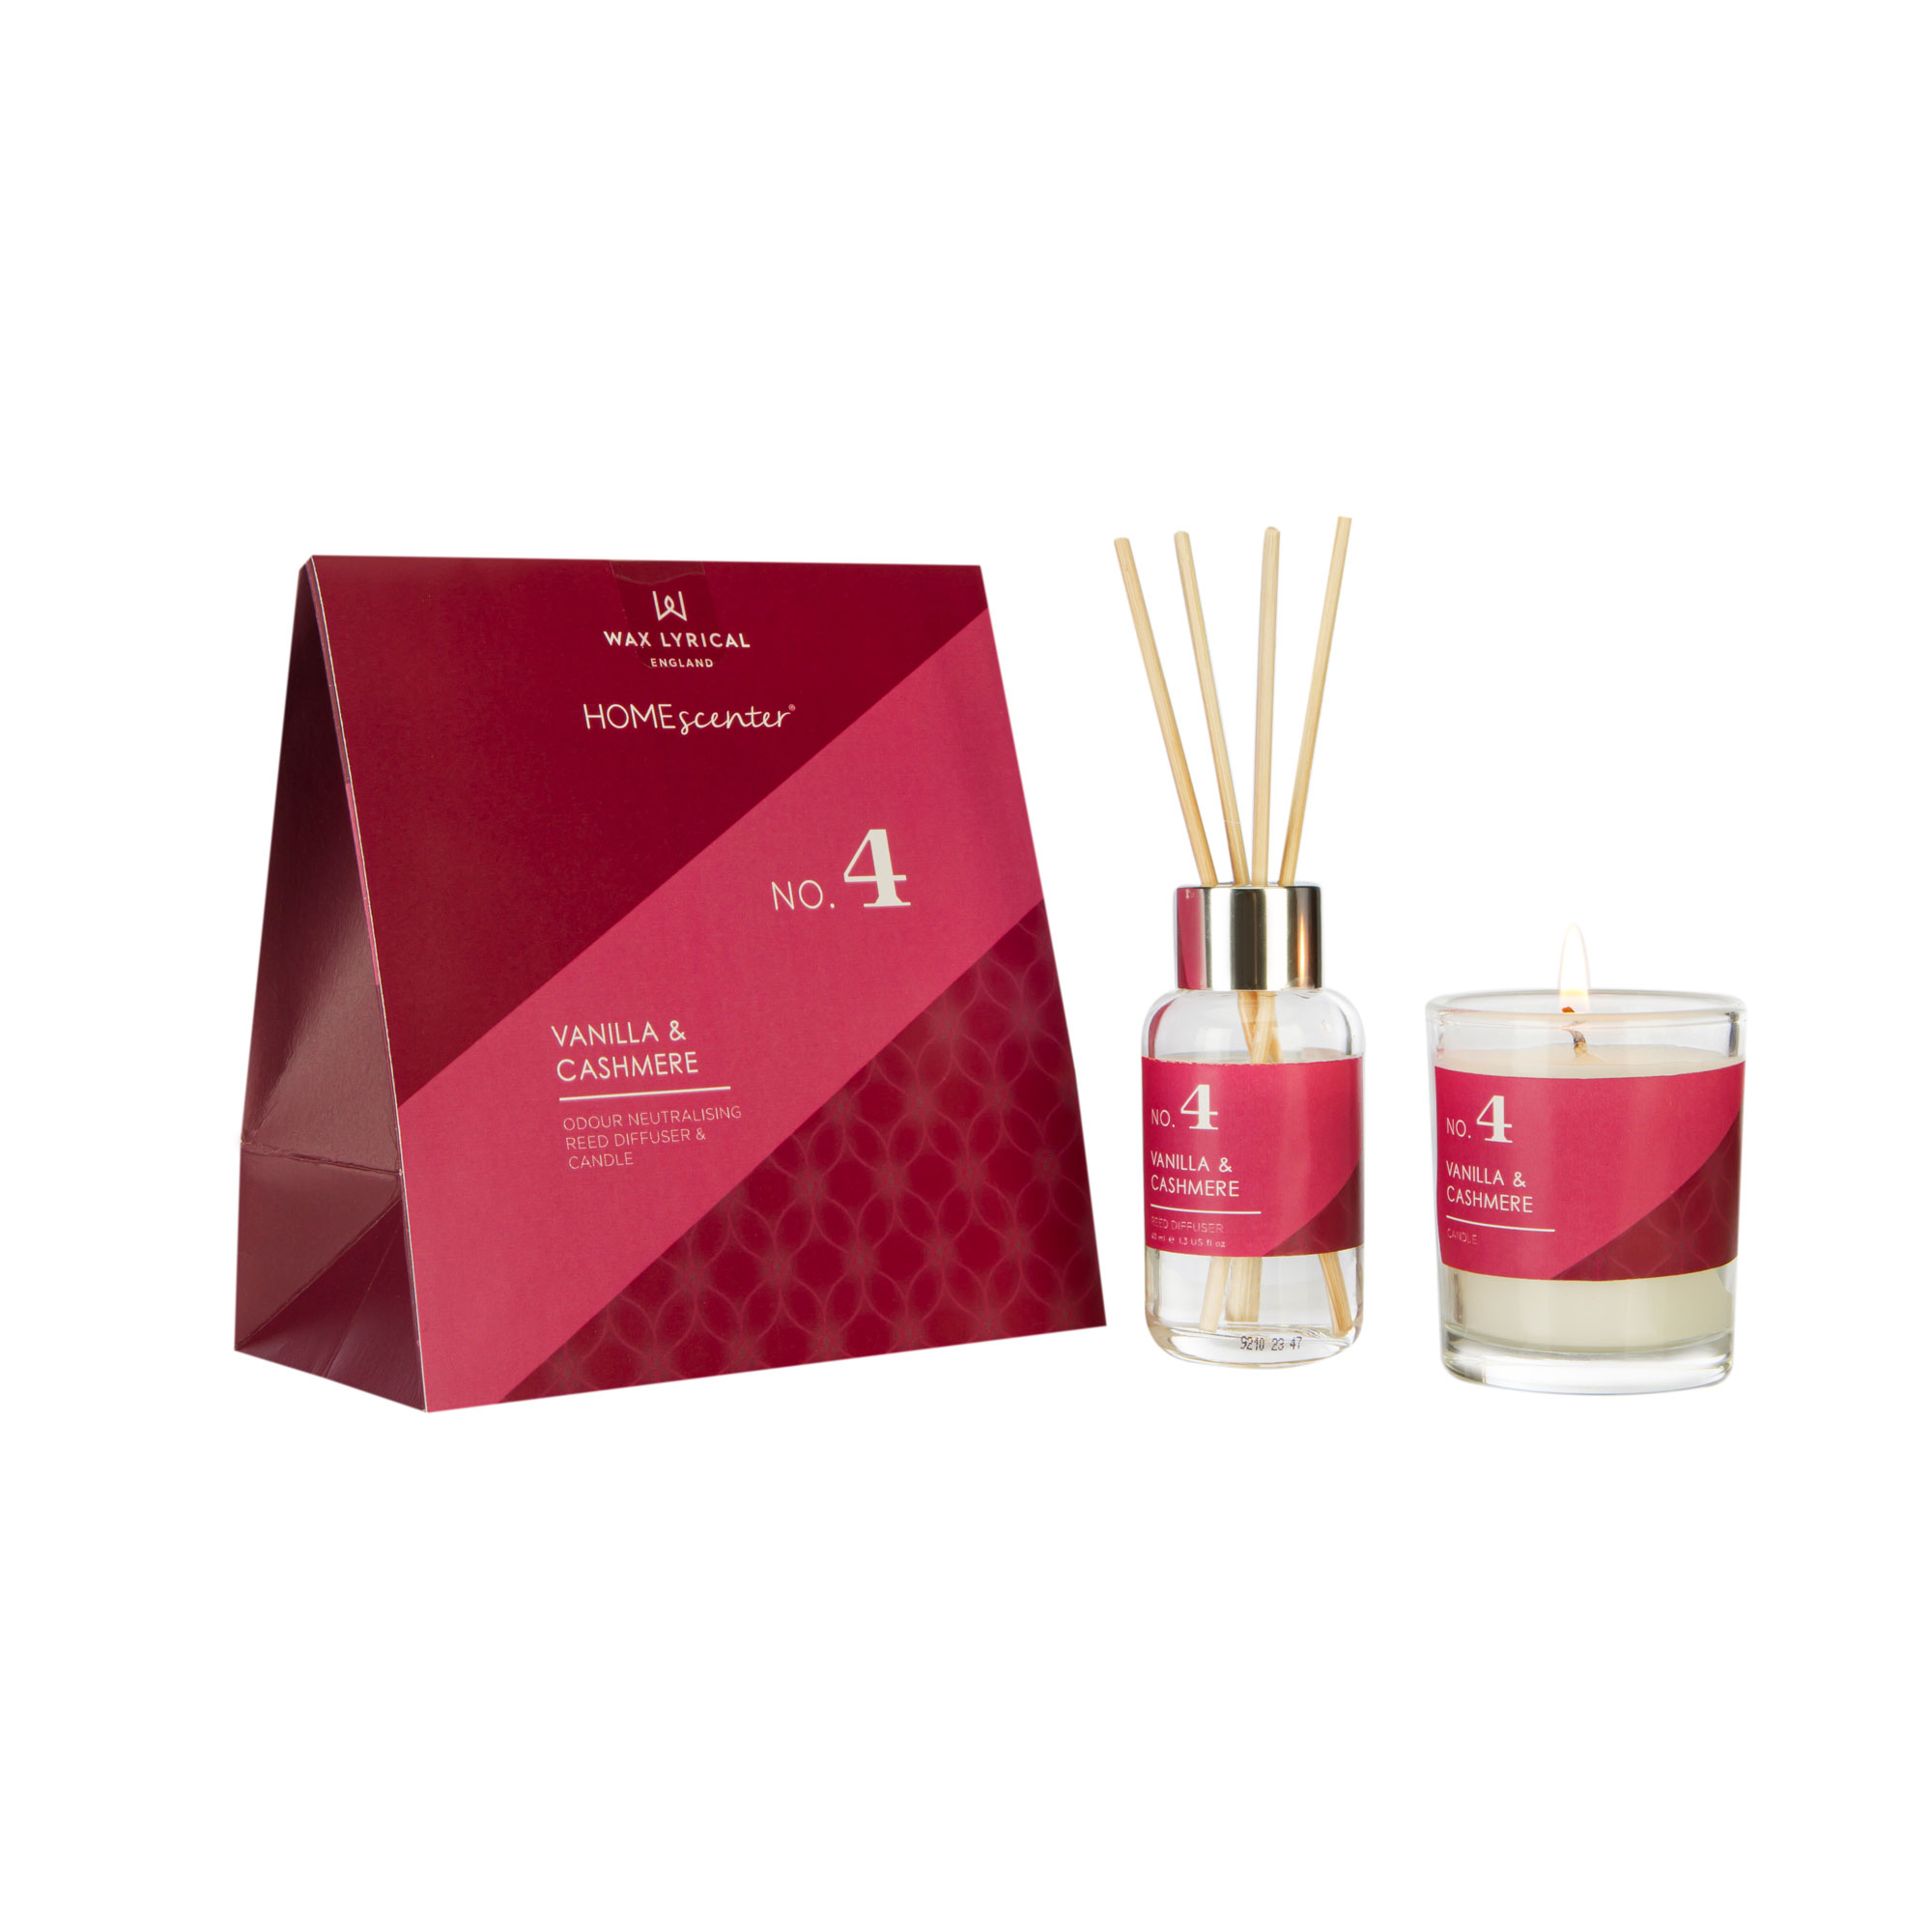 HomeScenter No. 4 Vanilla and Cashmere Reed Diffuser and Candle Gift Set image number null